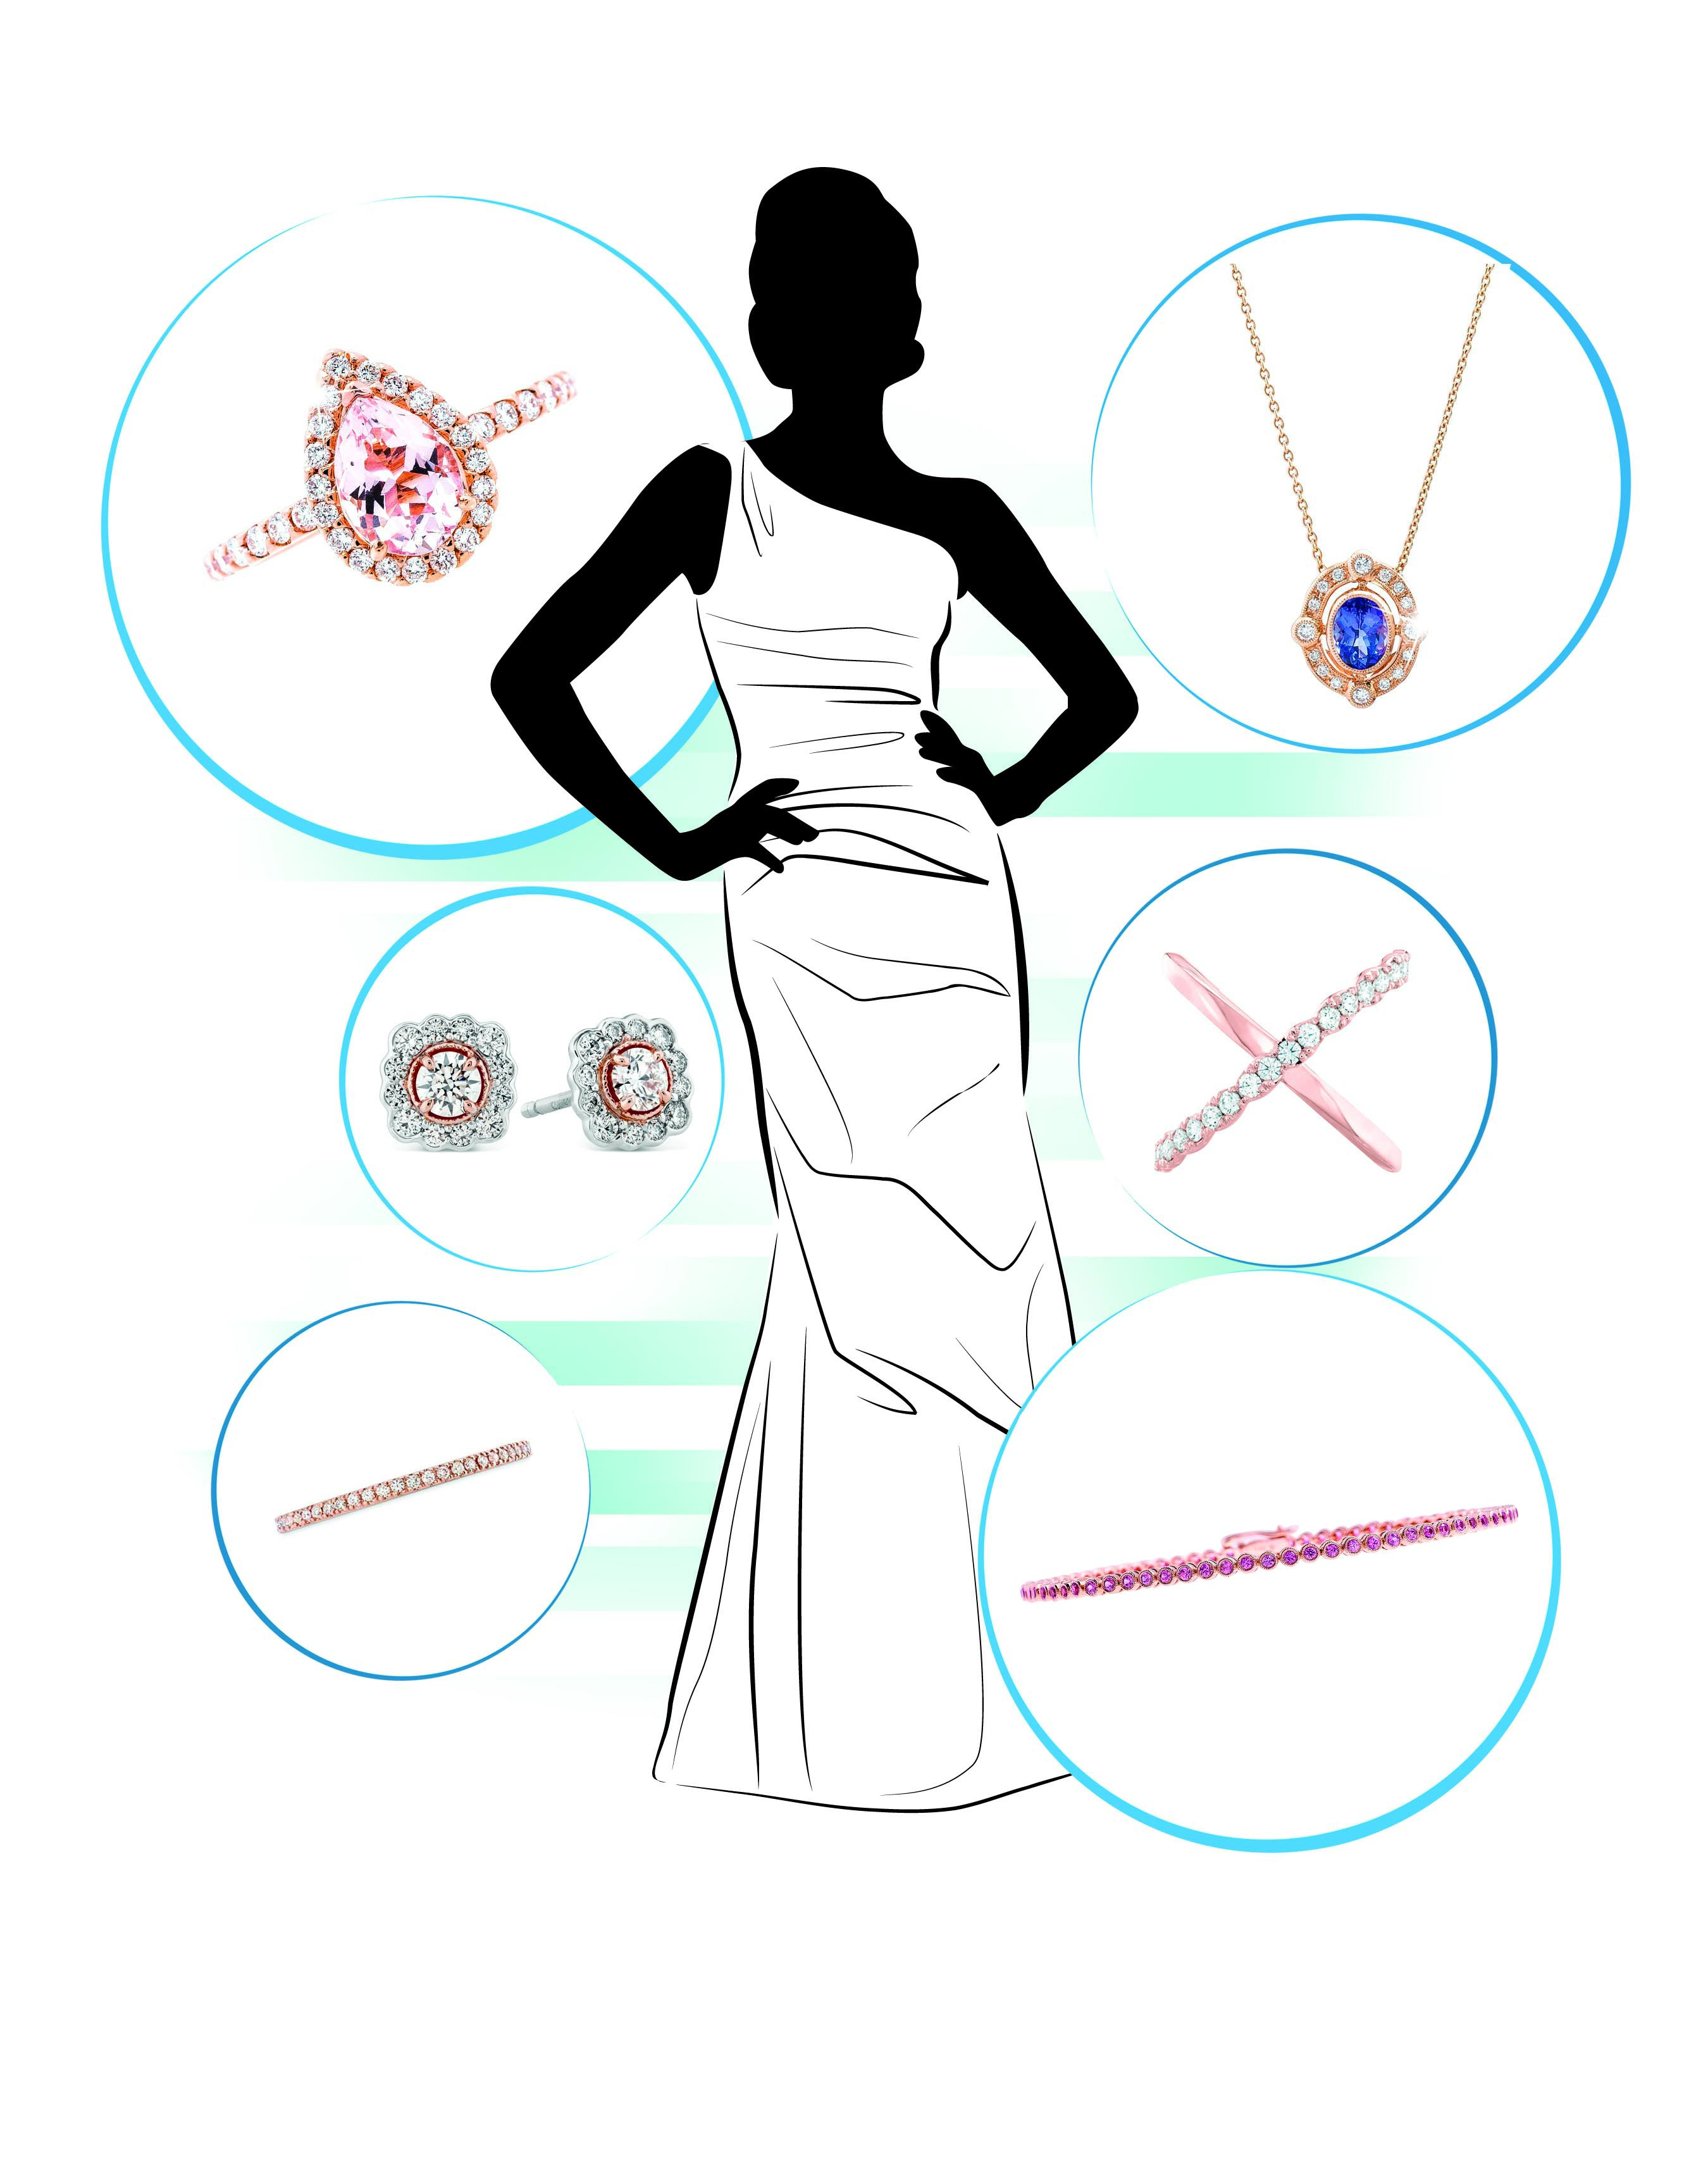 Bride silhouette with styled jewelry featuring a rose gold morganite engagement ring,
rose gold bracelets and crossover ring, white gold morganite stud earrings, and a yellow
gold pendant necklace centered with a blue sapphire.